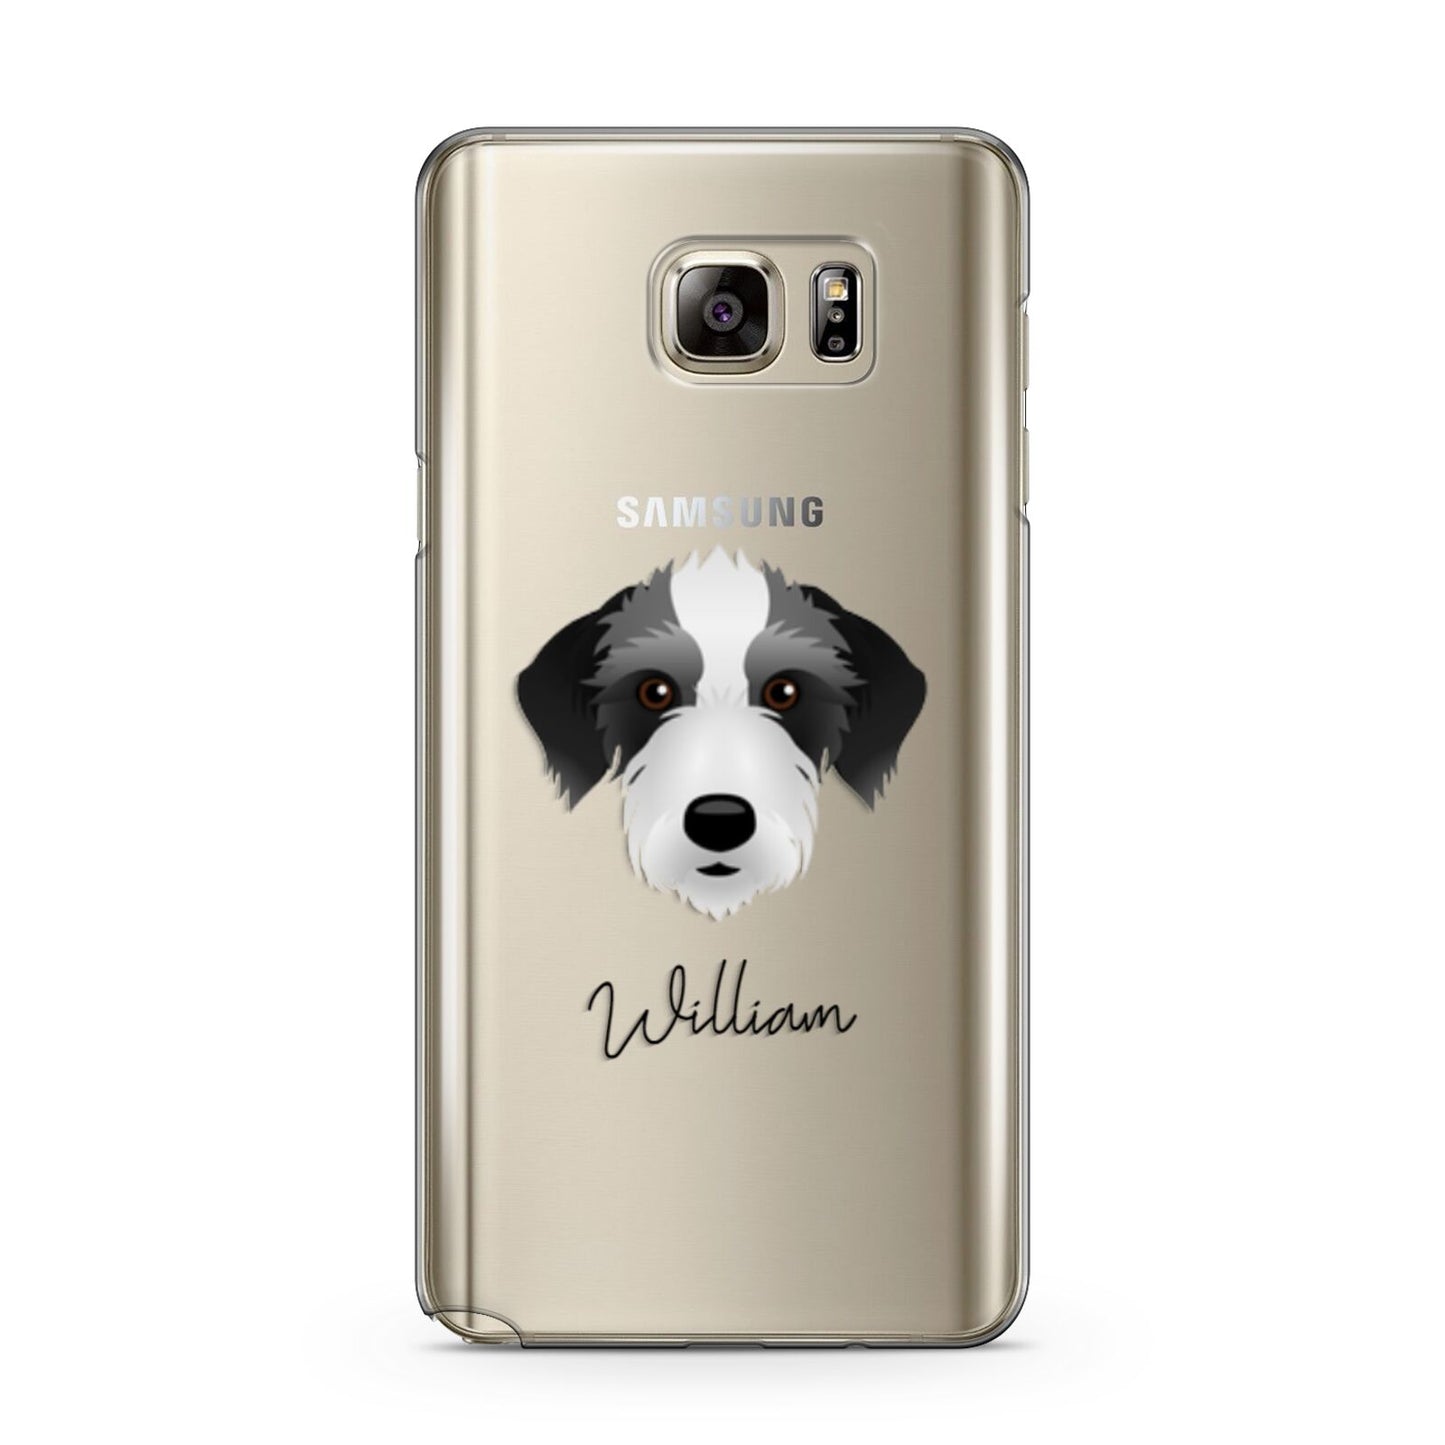 Bedlington Whippet Personalised Samsung Galaxy Note 5 Case